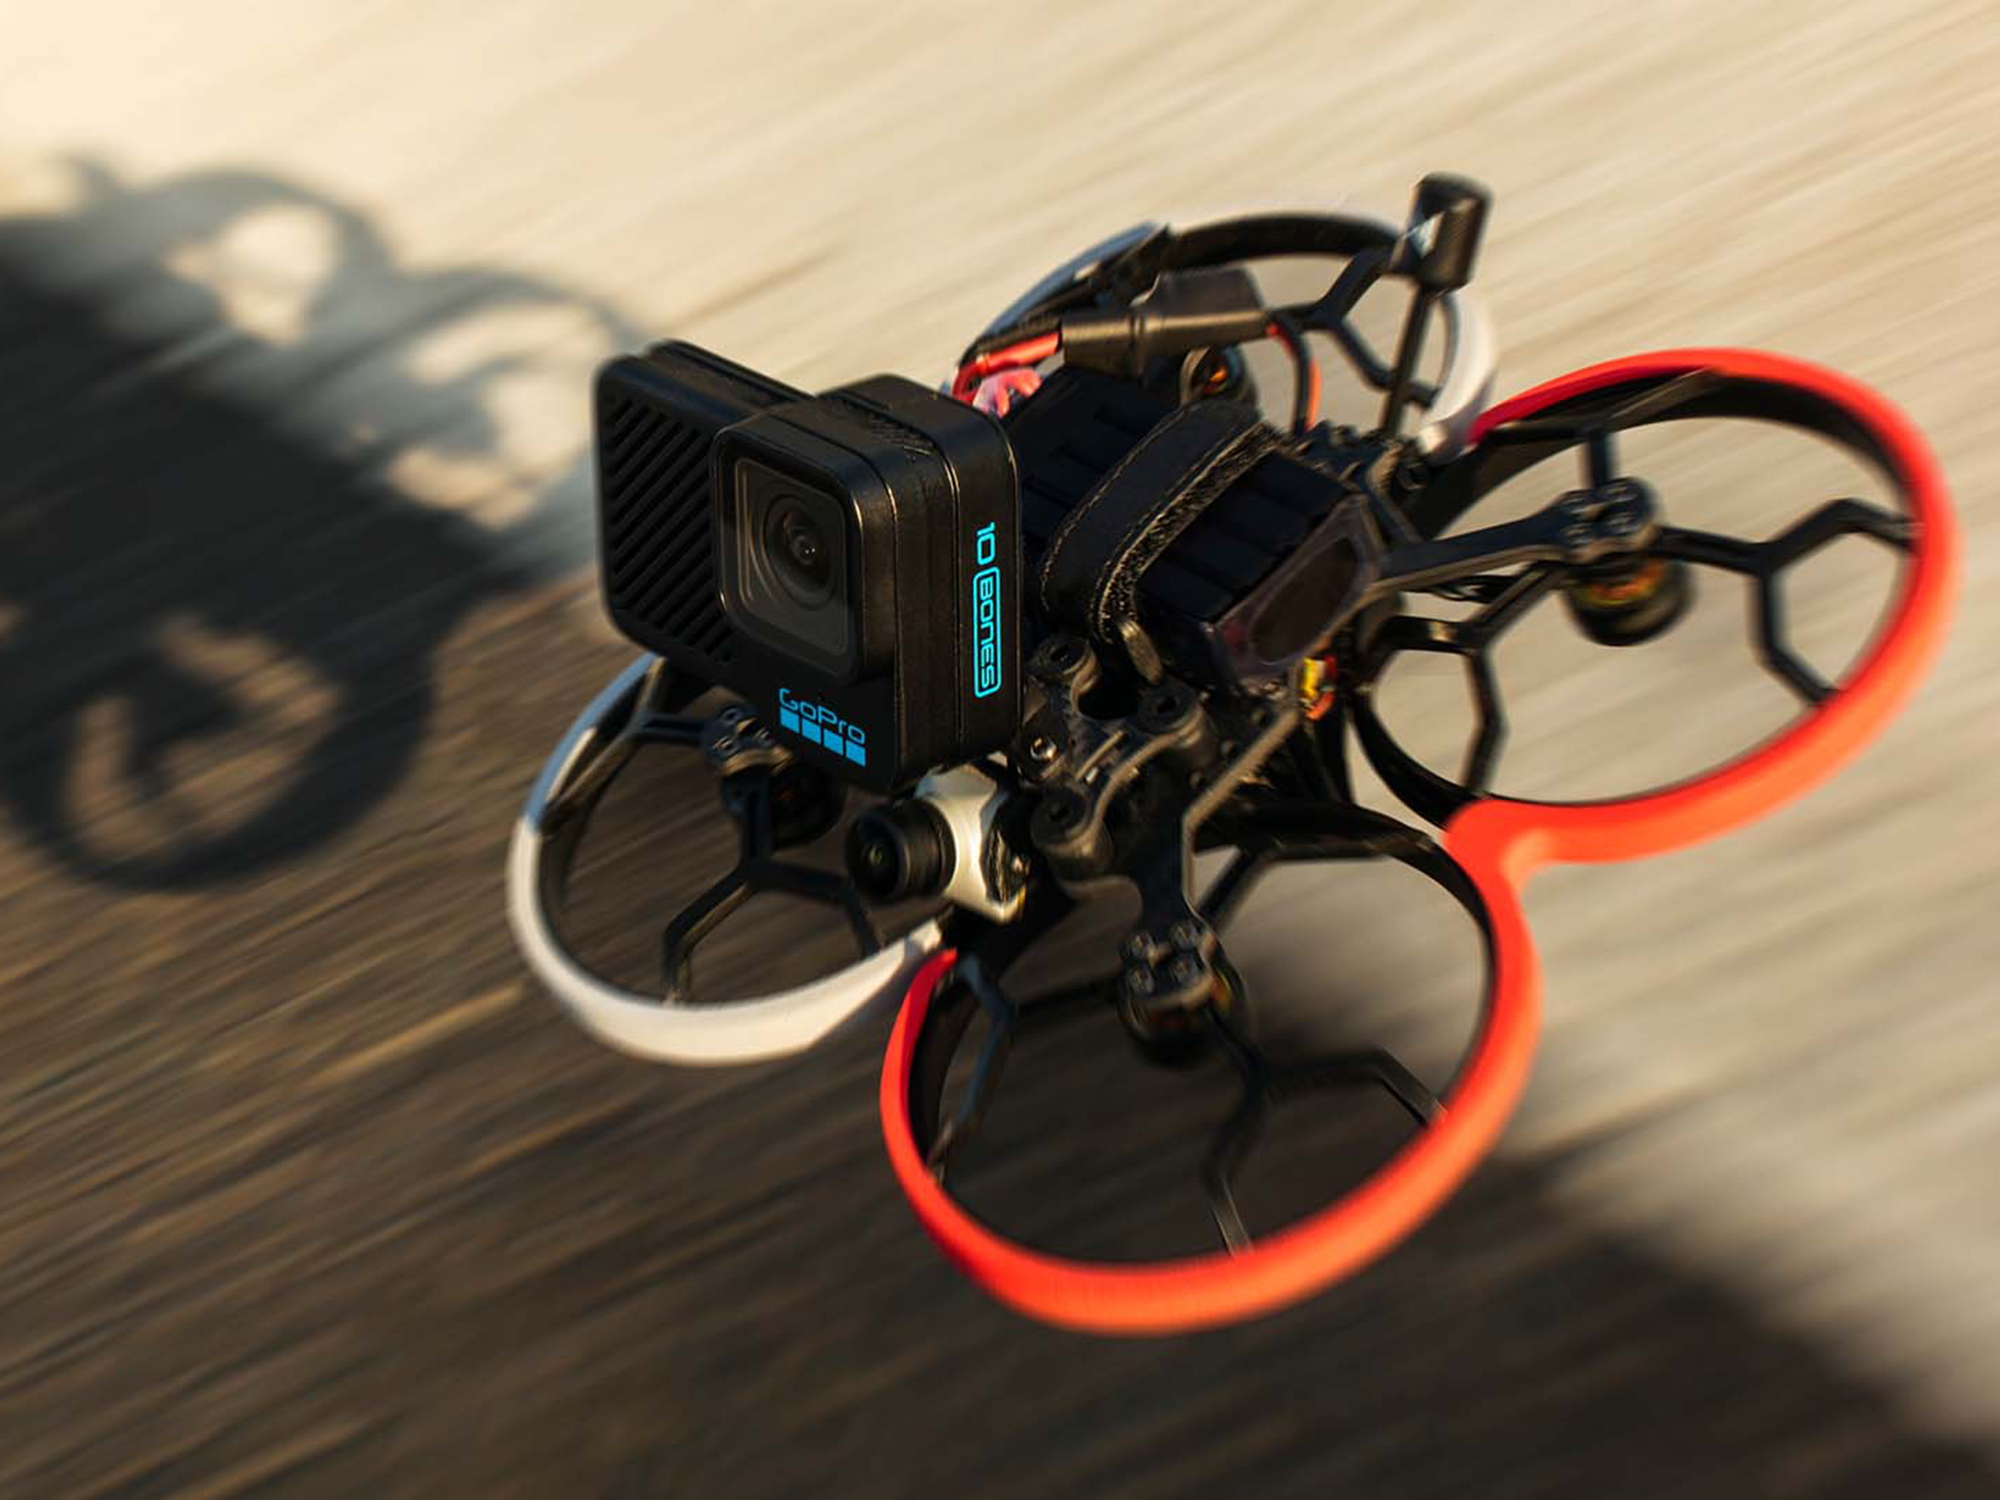 GoPro drops a niche new action cam for FPV drones